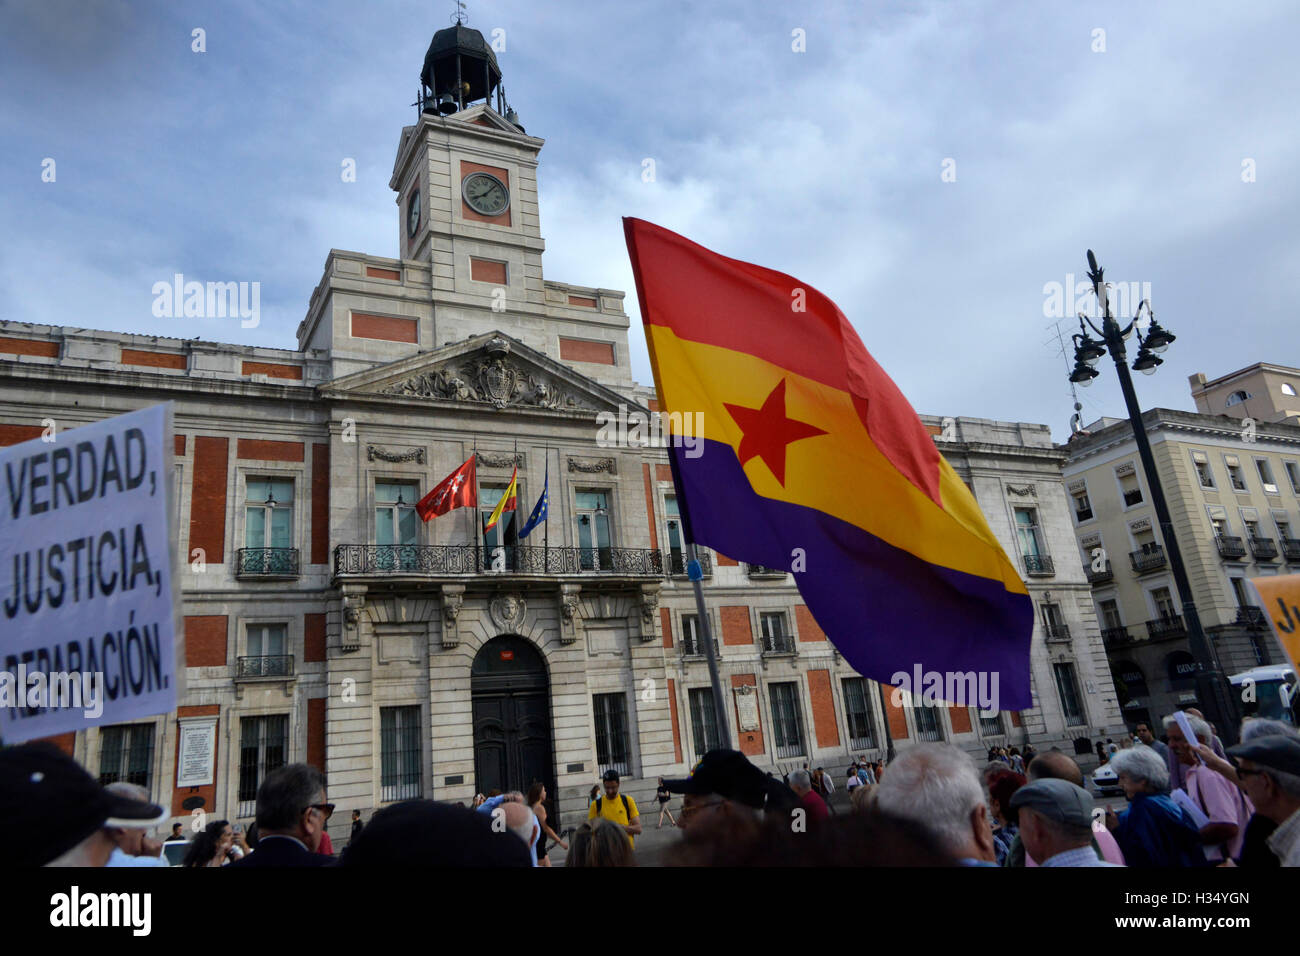 June 11, 2015 - FAMILIES OF THE MISSING REPUBLICANS FROM THE SPAINISH CIVIL WAR 1936-39, AND THE FRANCO DICTATORSHIP, GATHER AT PUERTA DEL SOL, THE CENTER OF MADRID, ACROSS FROM THE MUNICIPAL BUILDING WHERE MANY WERE IMPRISONED AND TORTURED. THEY ARE DEMANDING TO KNOW WHAT HAPPENED TO THEIR RELATIVES AND WHERE THEIR BODIES MIGHT BE LOCATED SO MANY YEARS LATER. © Kenneth Martin/ZUMA Wire/Alamy Live News Stock Photo